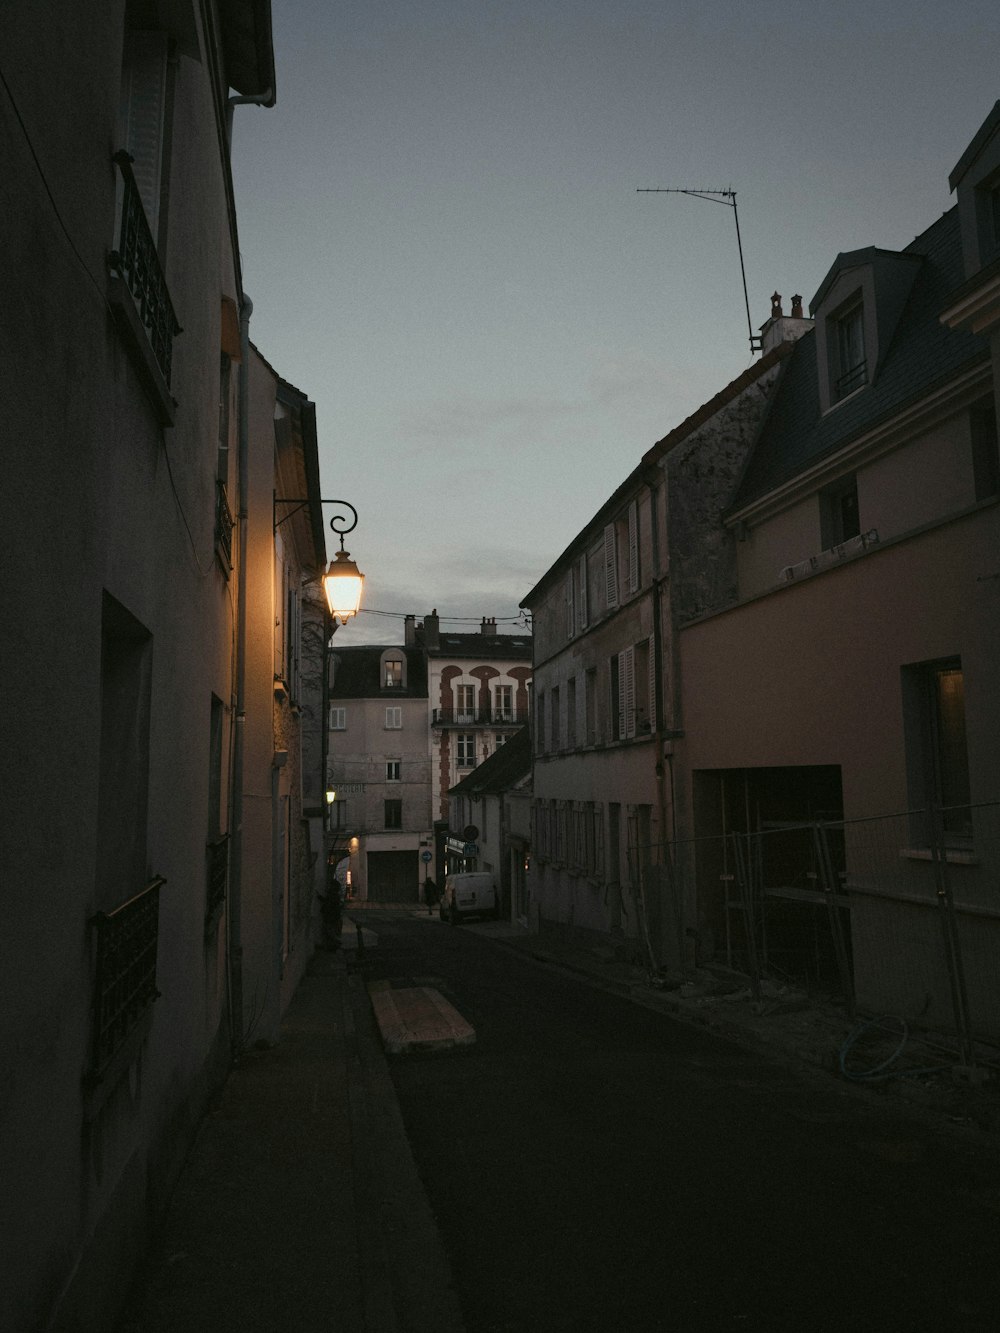 a dark alley way with a street light in the distance